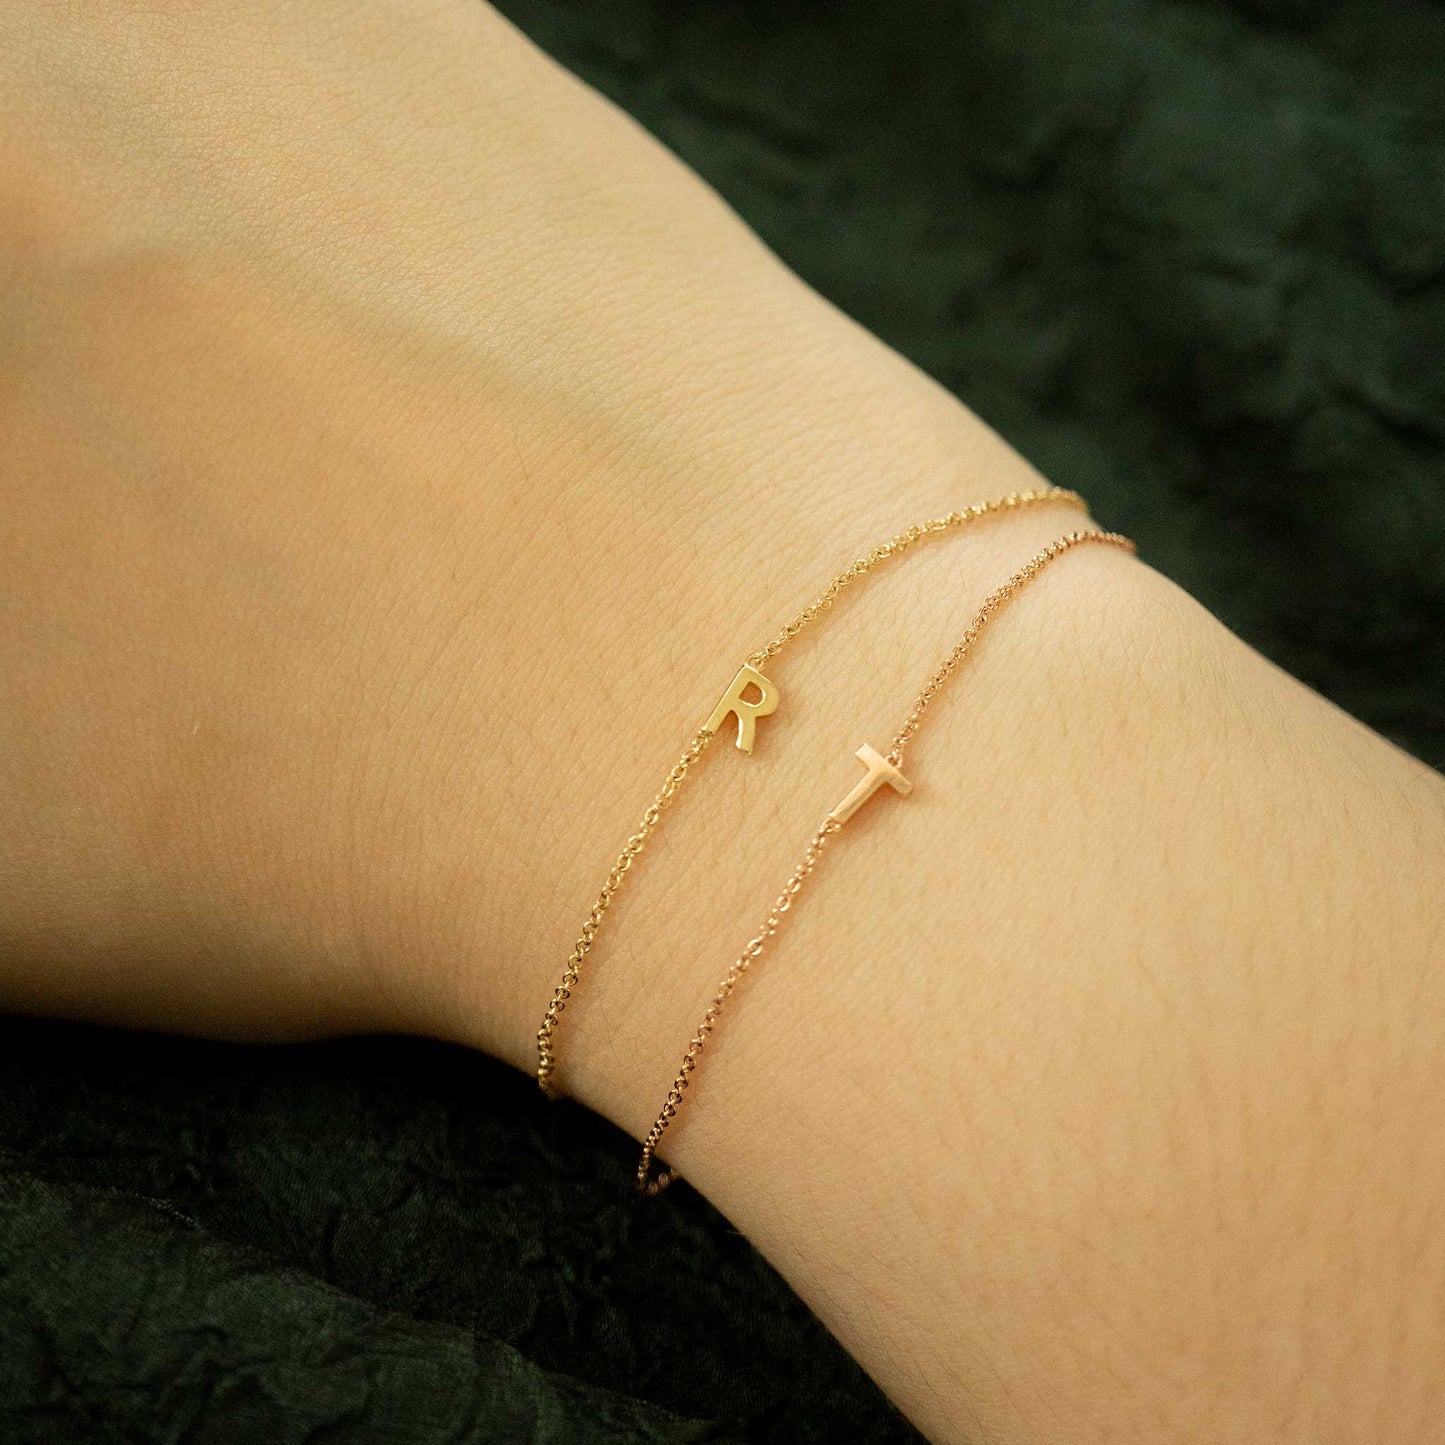 Solid Gold Initial and Birthstone Bracelet